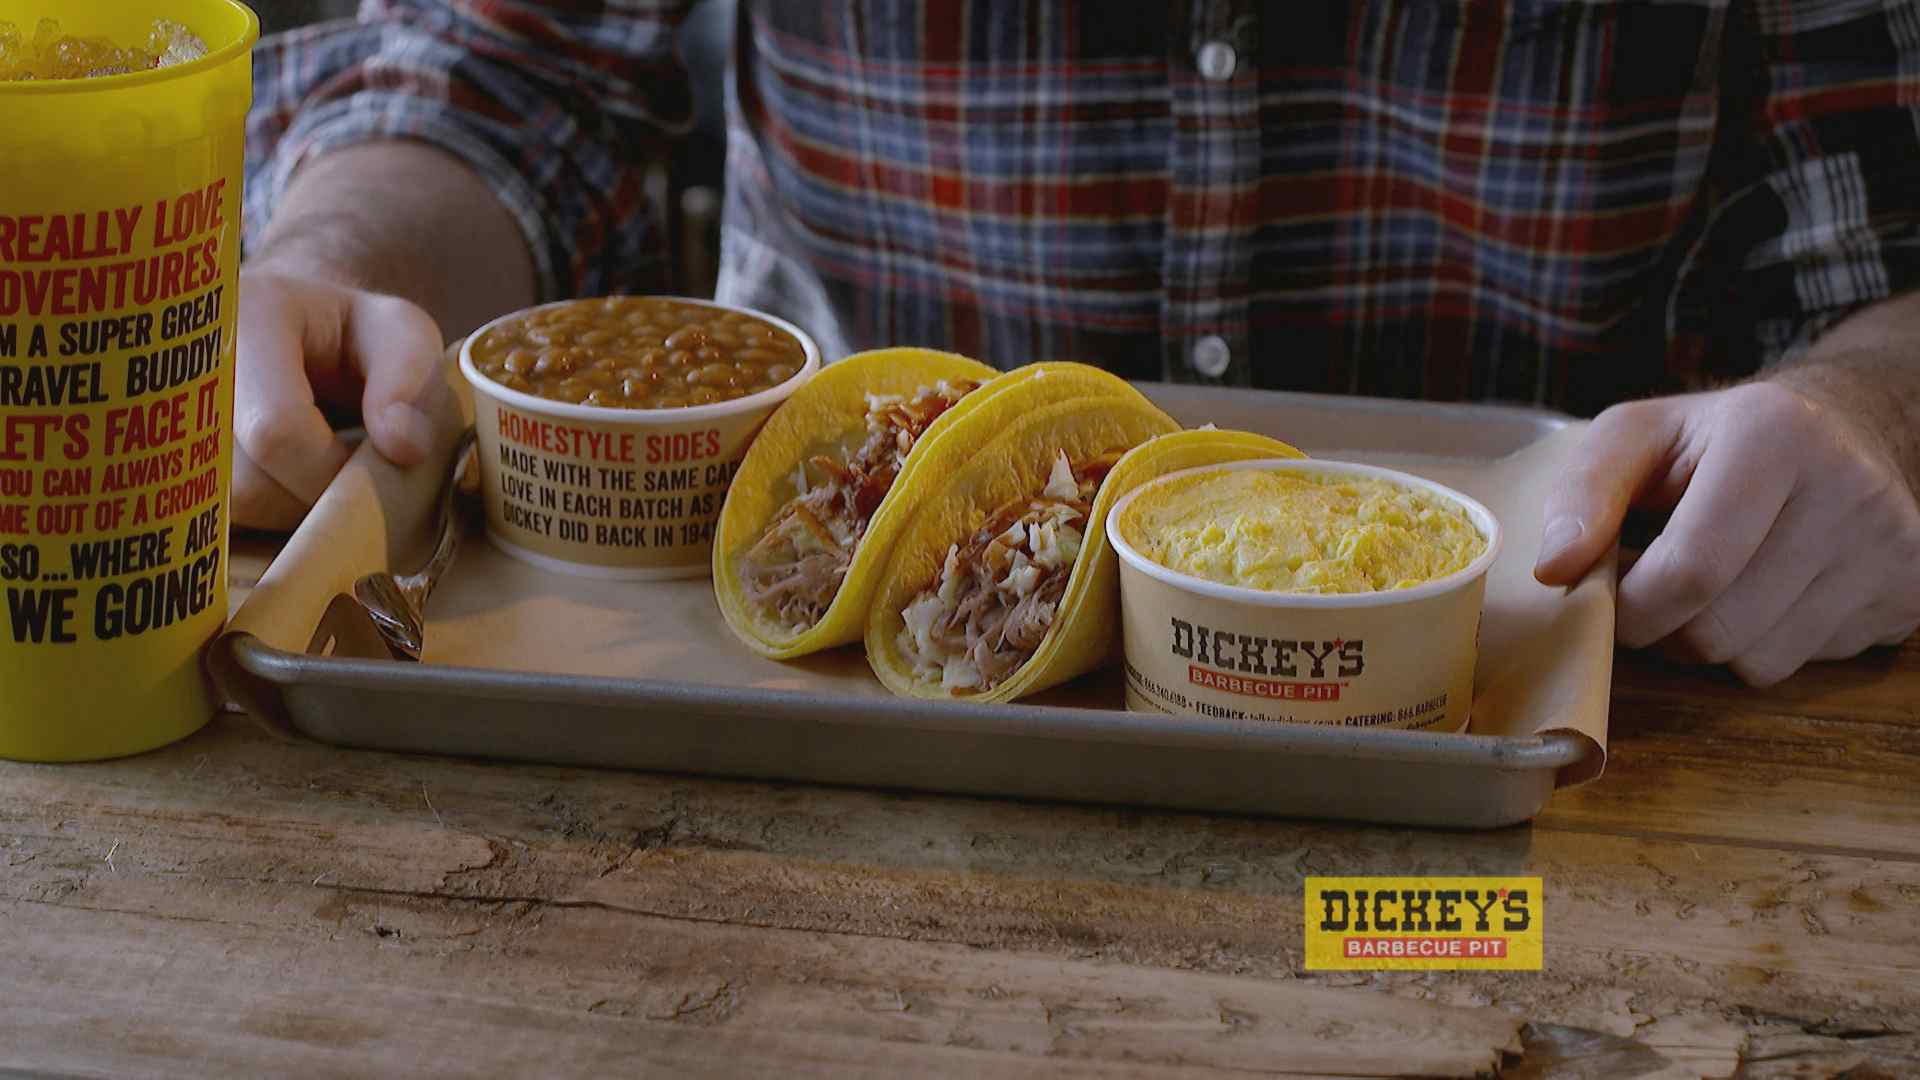 Dickey’s Barbecue Pit Launches New Limited Time Offer Featuring Pulled Pork Street Tacos